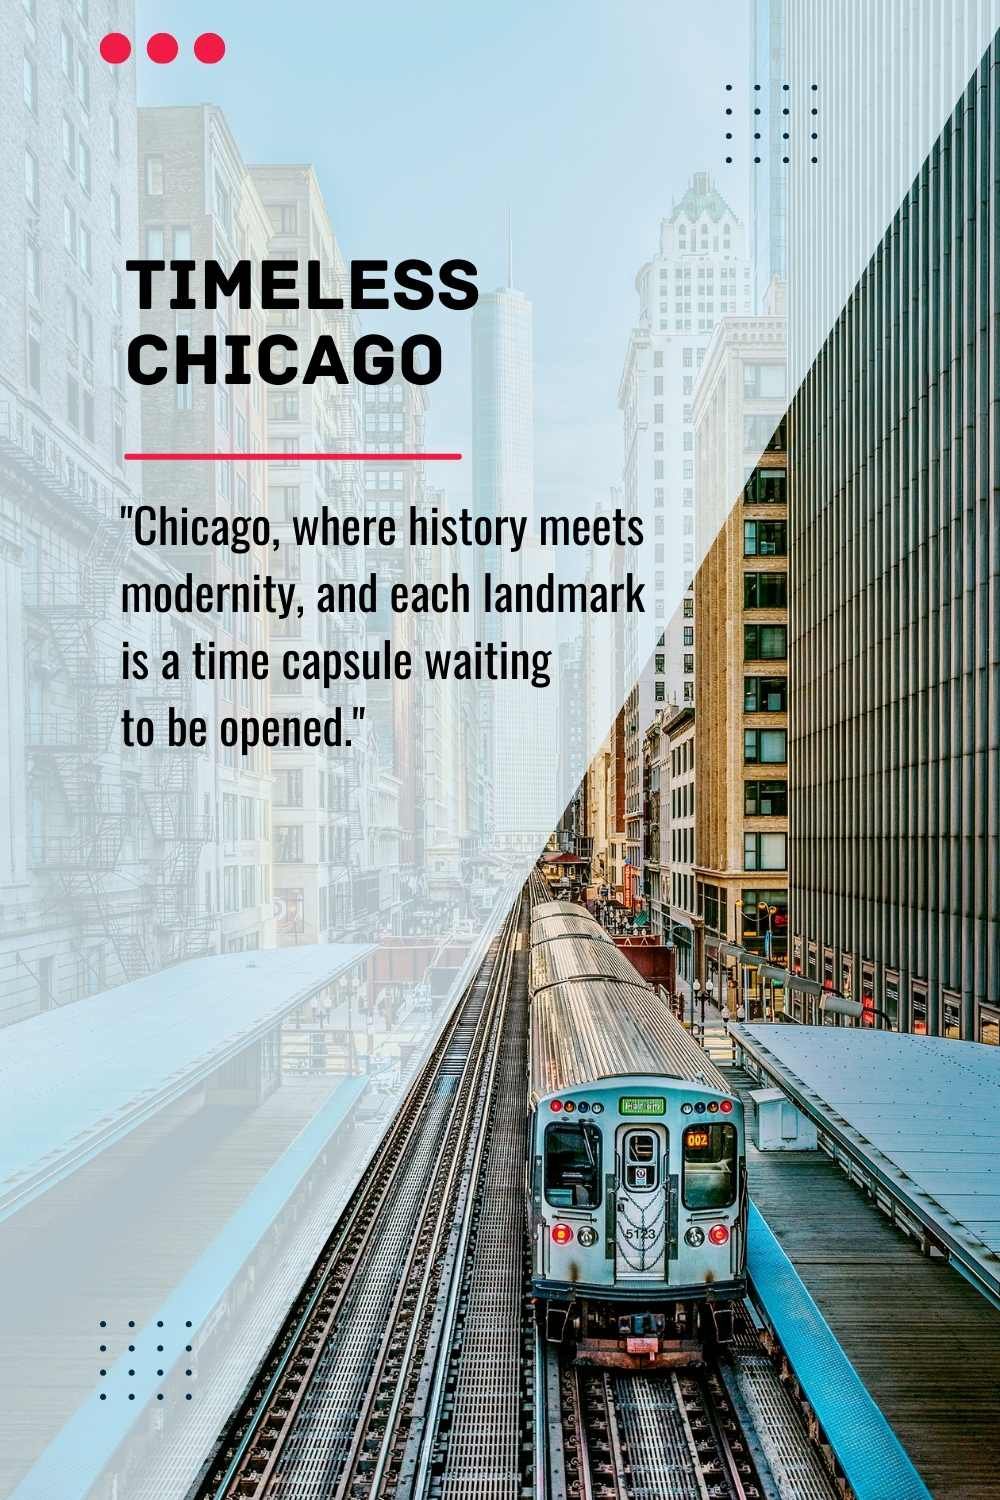 Famous Chicago Quotes That Can Be Used As quotes with pics